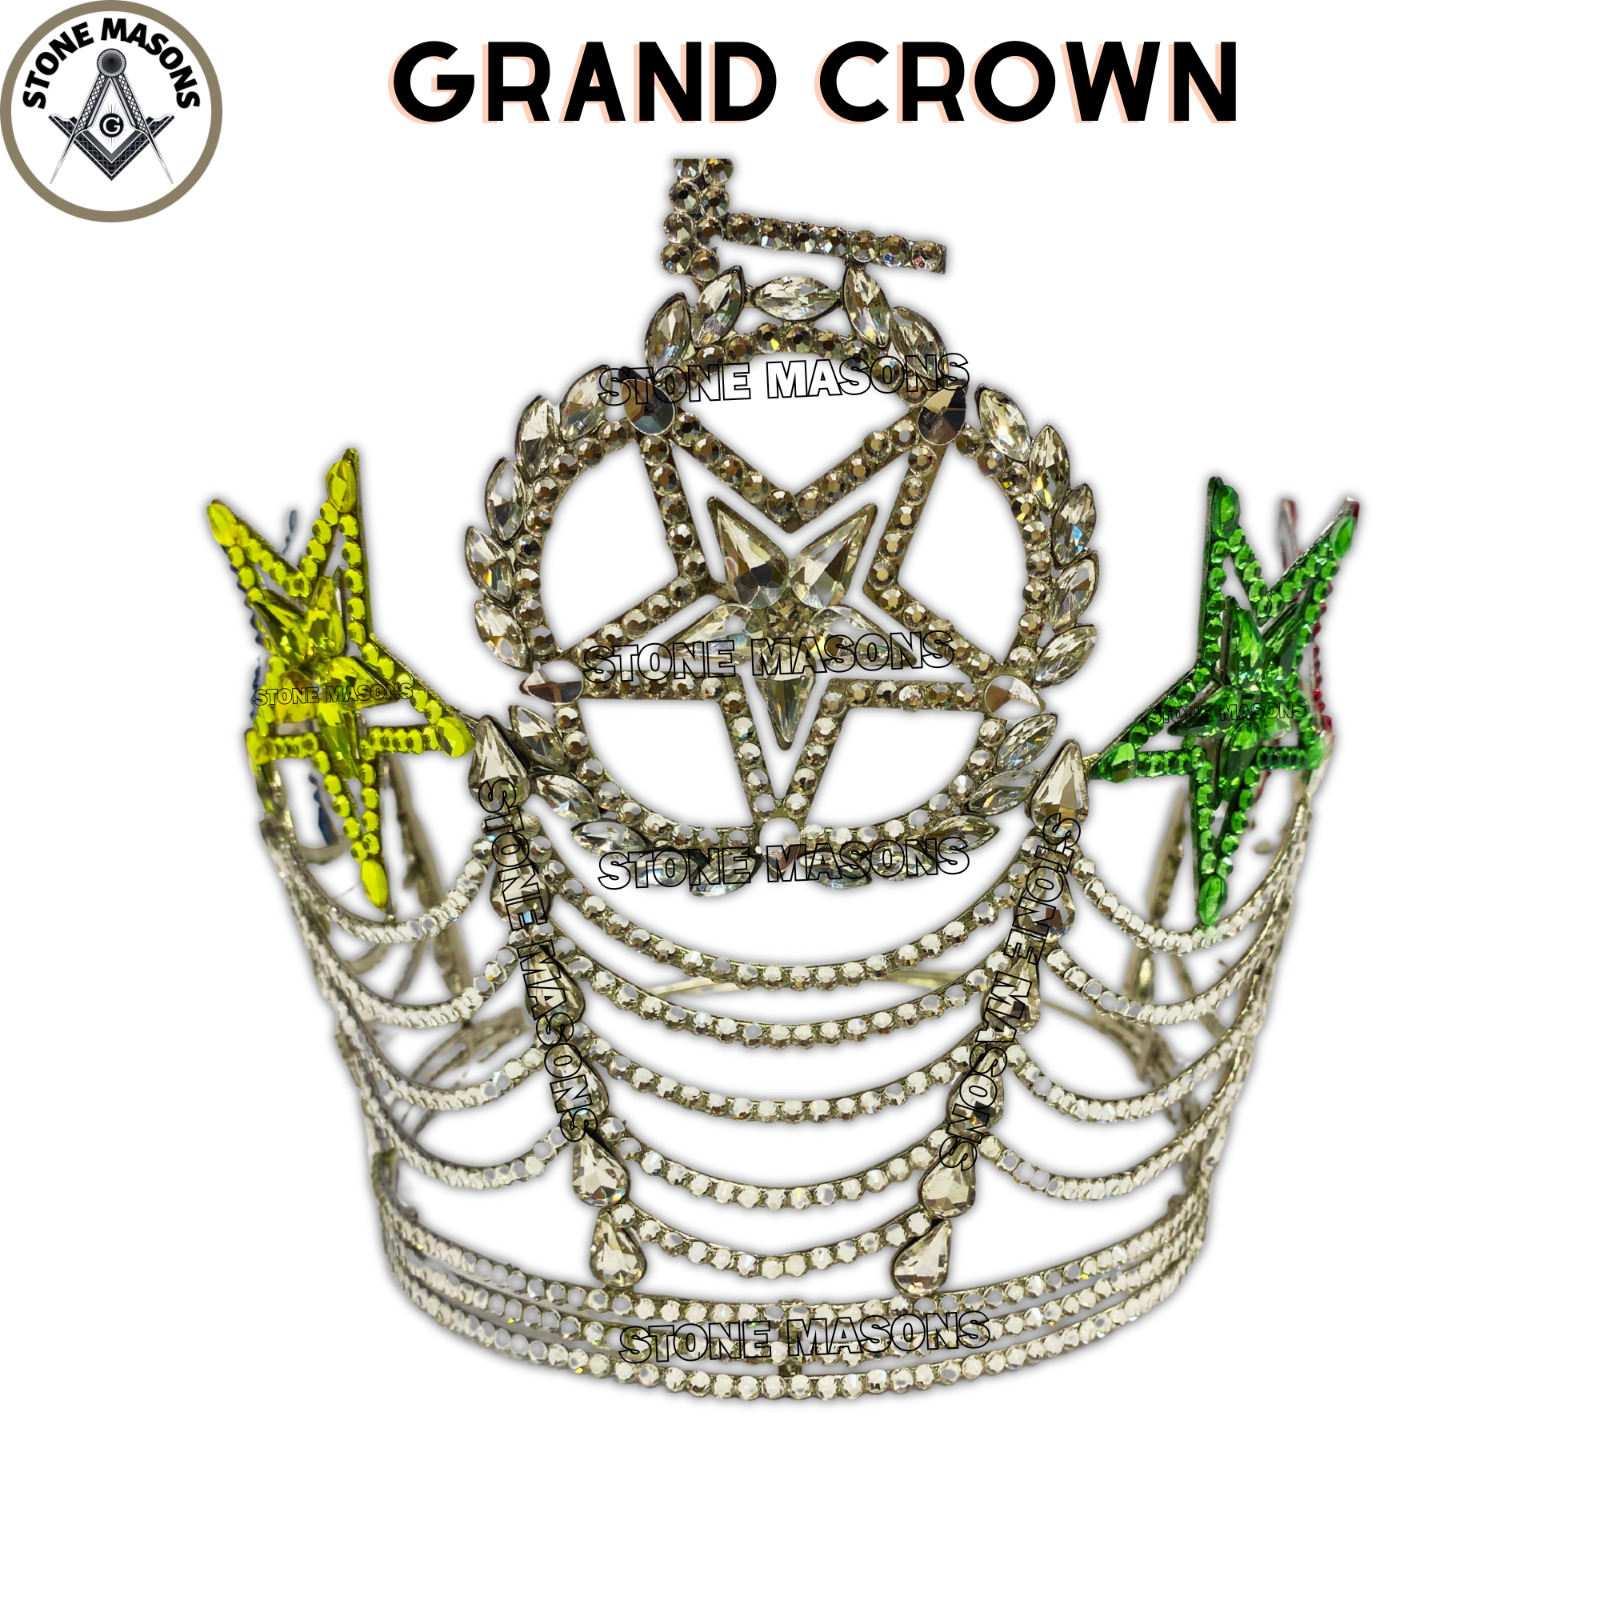 OES Grand Worthy OES Big Size Crown Rare Style Silver Tone Adjustable With Case